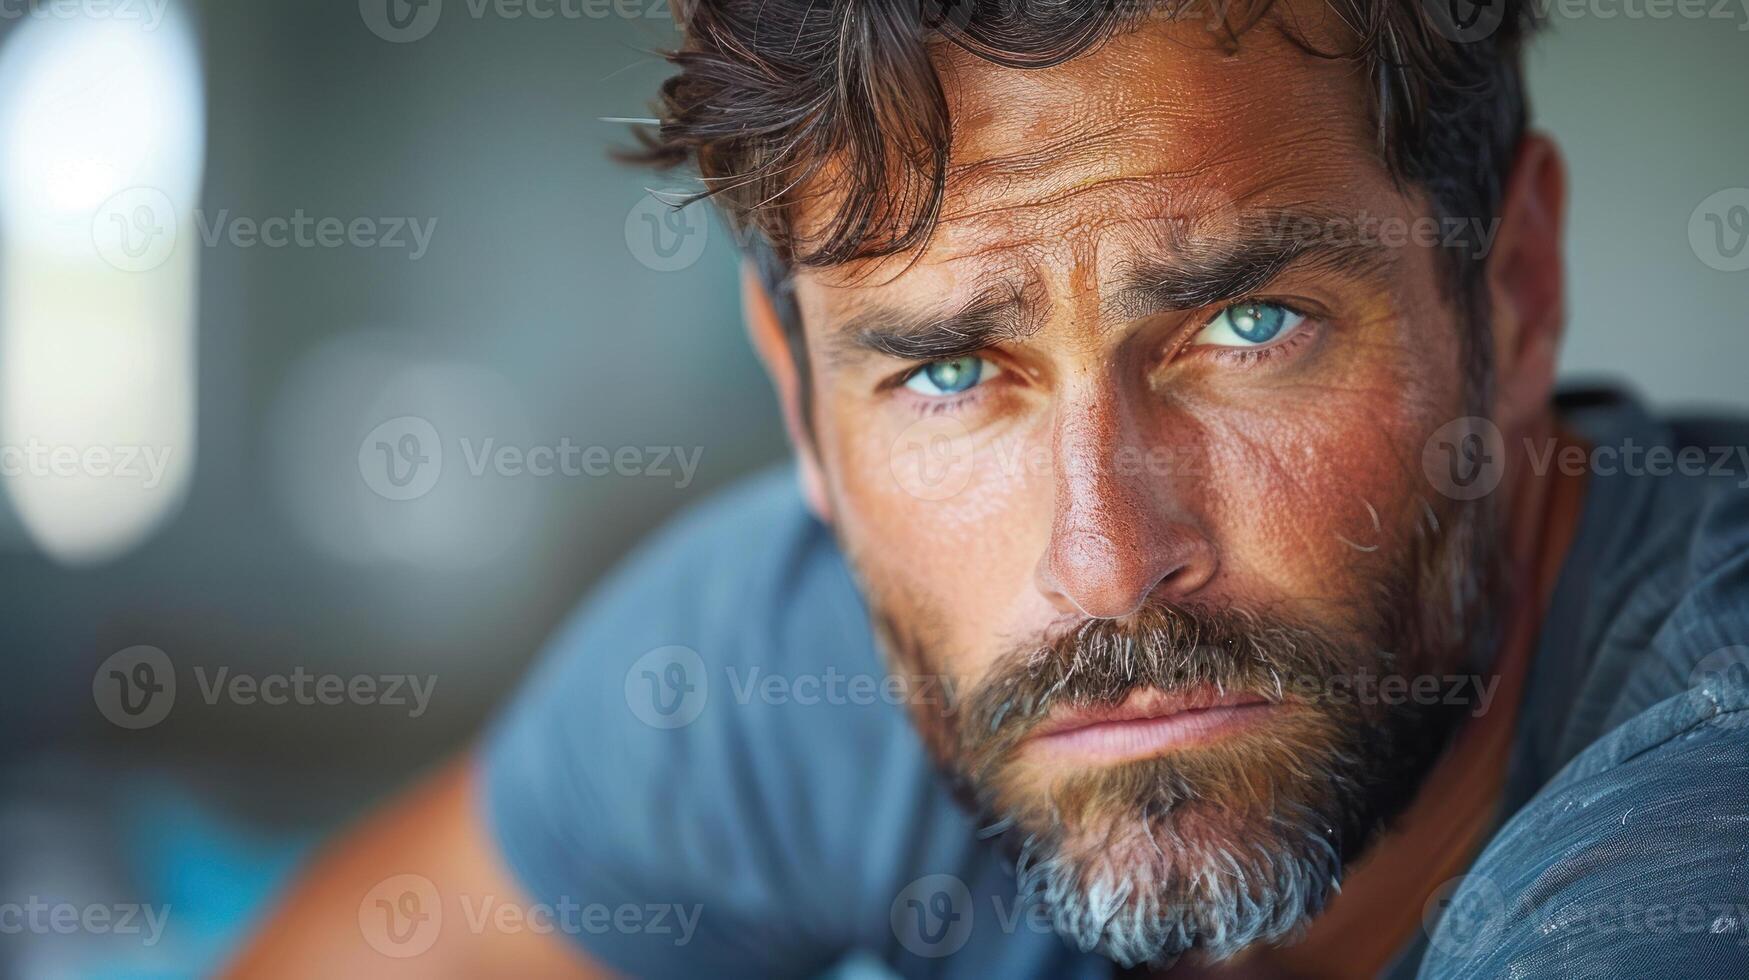 A close-up shot of a man with striking blue eyes photo